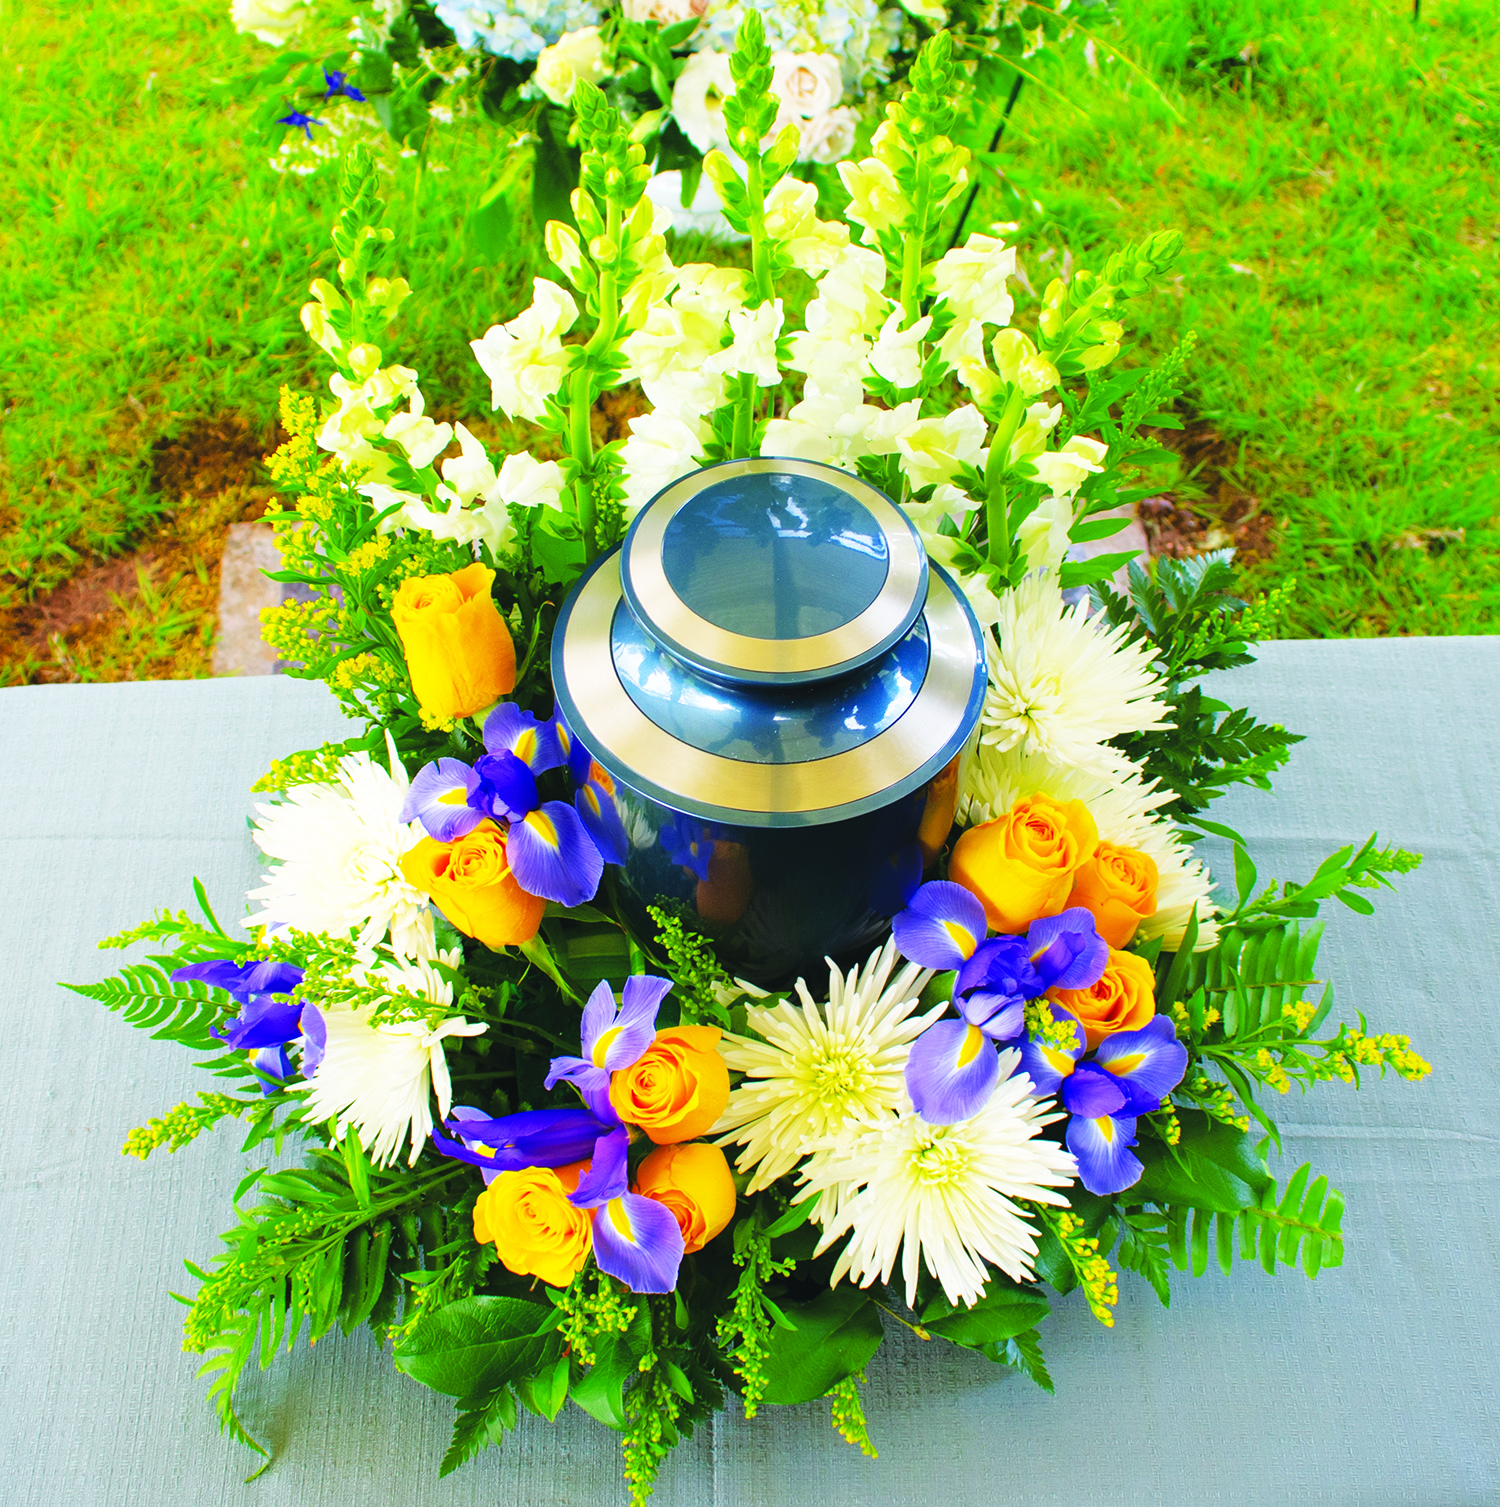 Cremation urn at funeral ceremony with floral arrangement